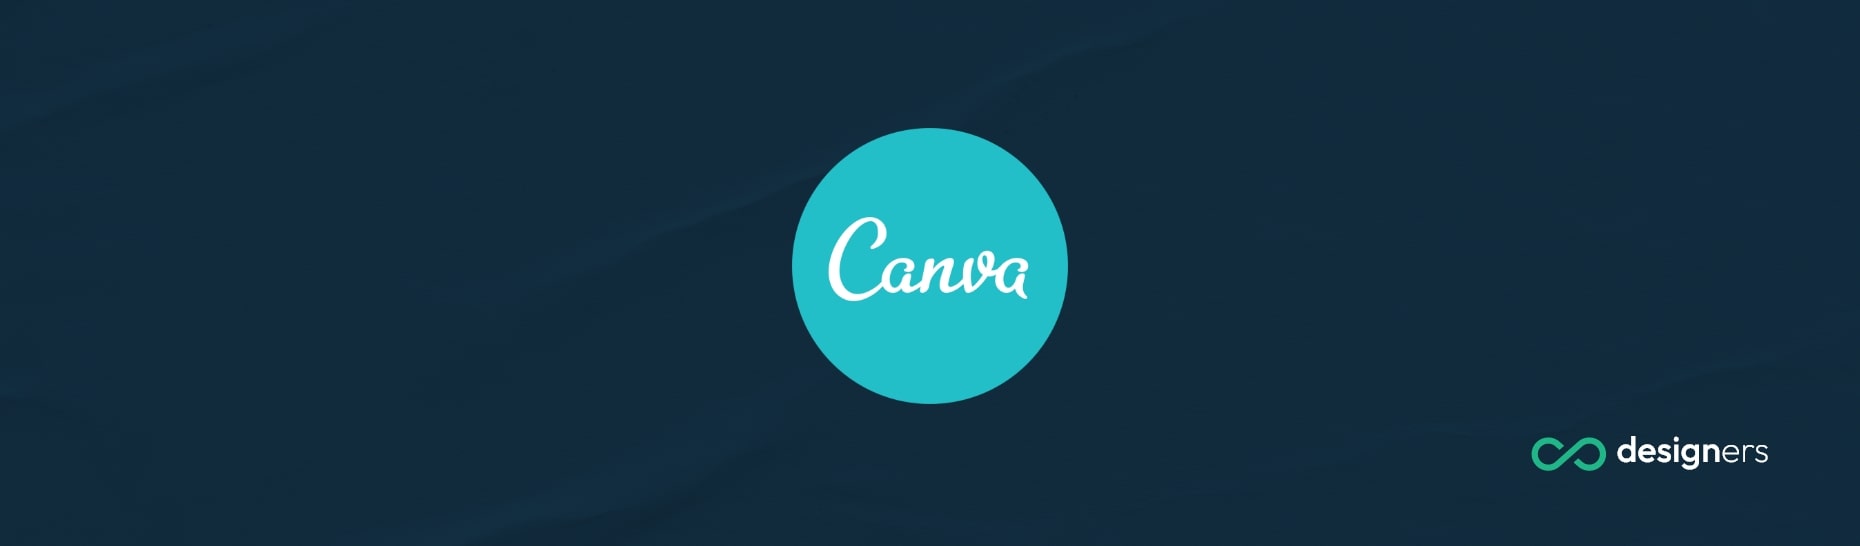 What Font Is Times New Roman in Canva?